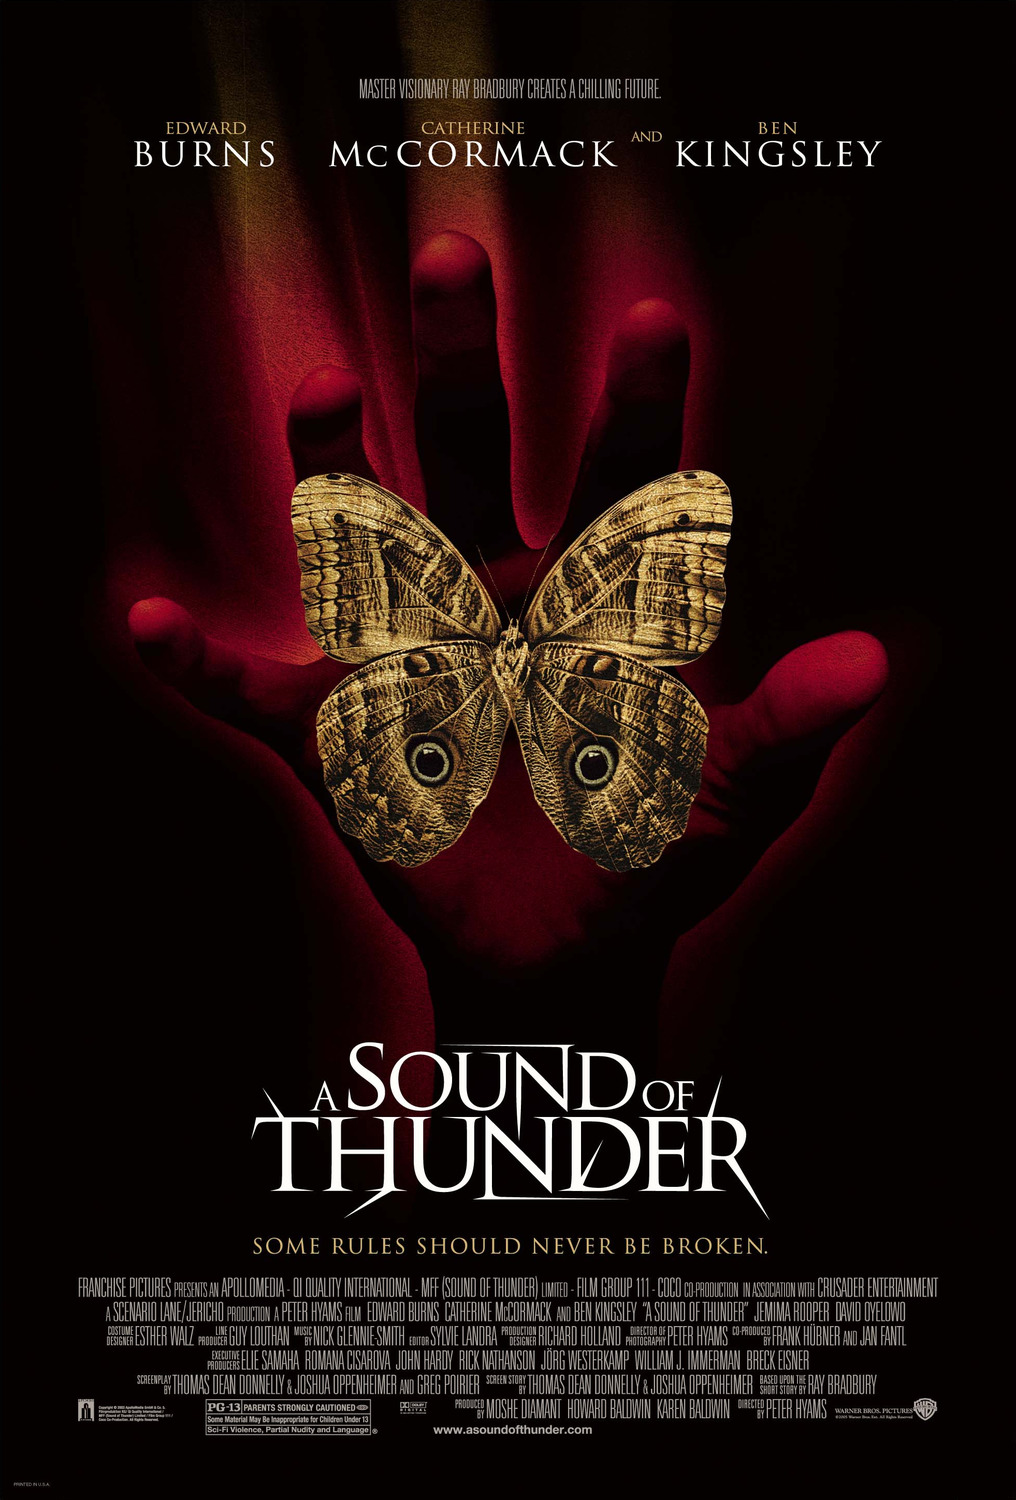 SOUND OF THUNDER, A